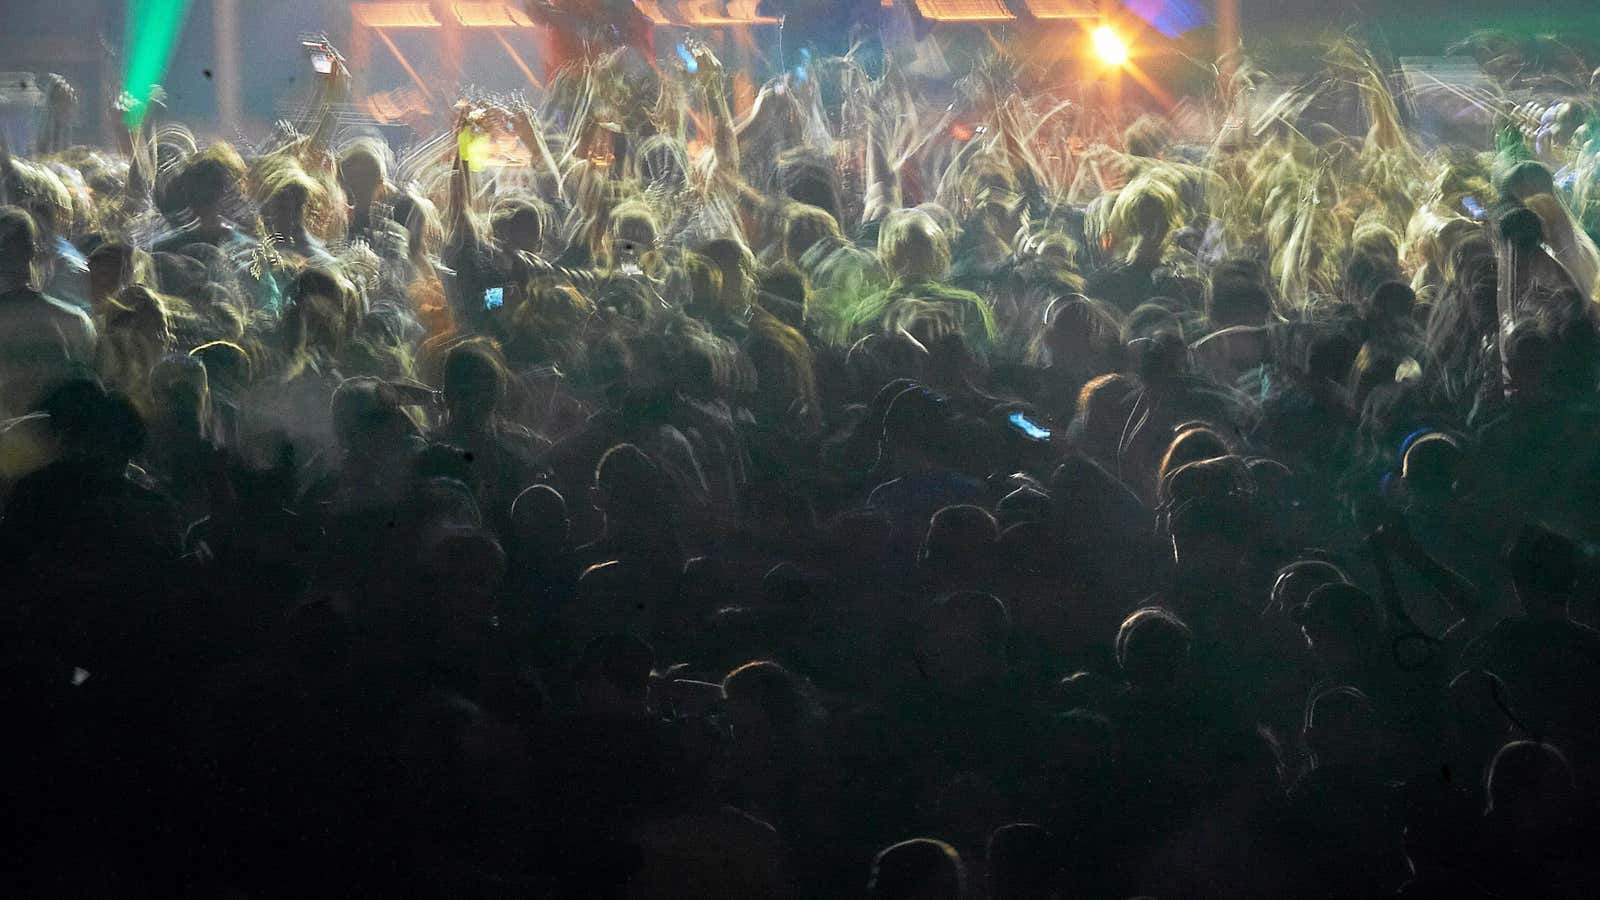 The same drugs used in raves could be put to better use medically.